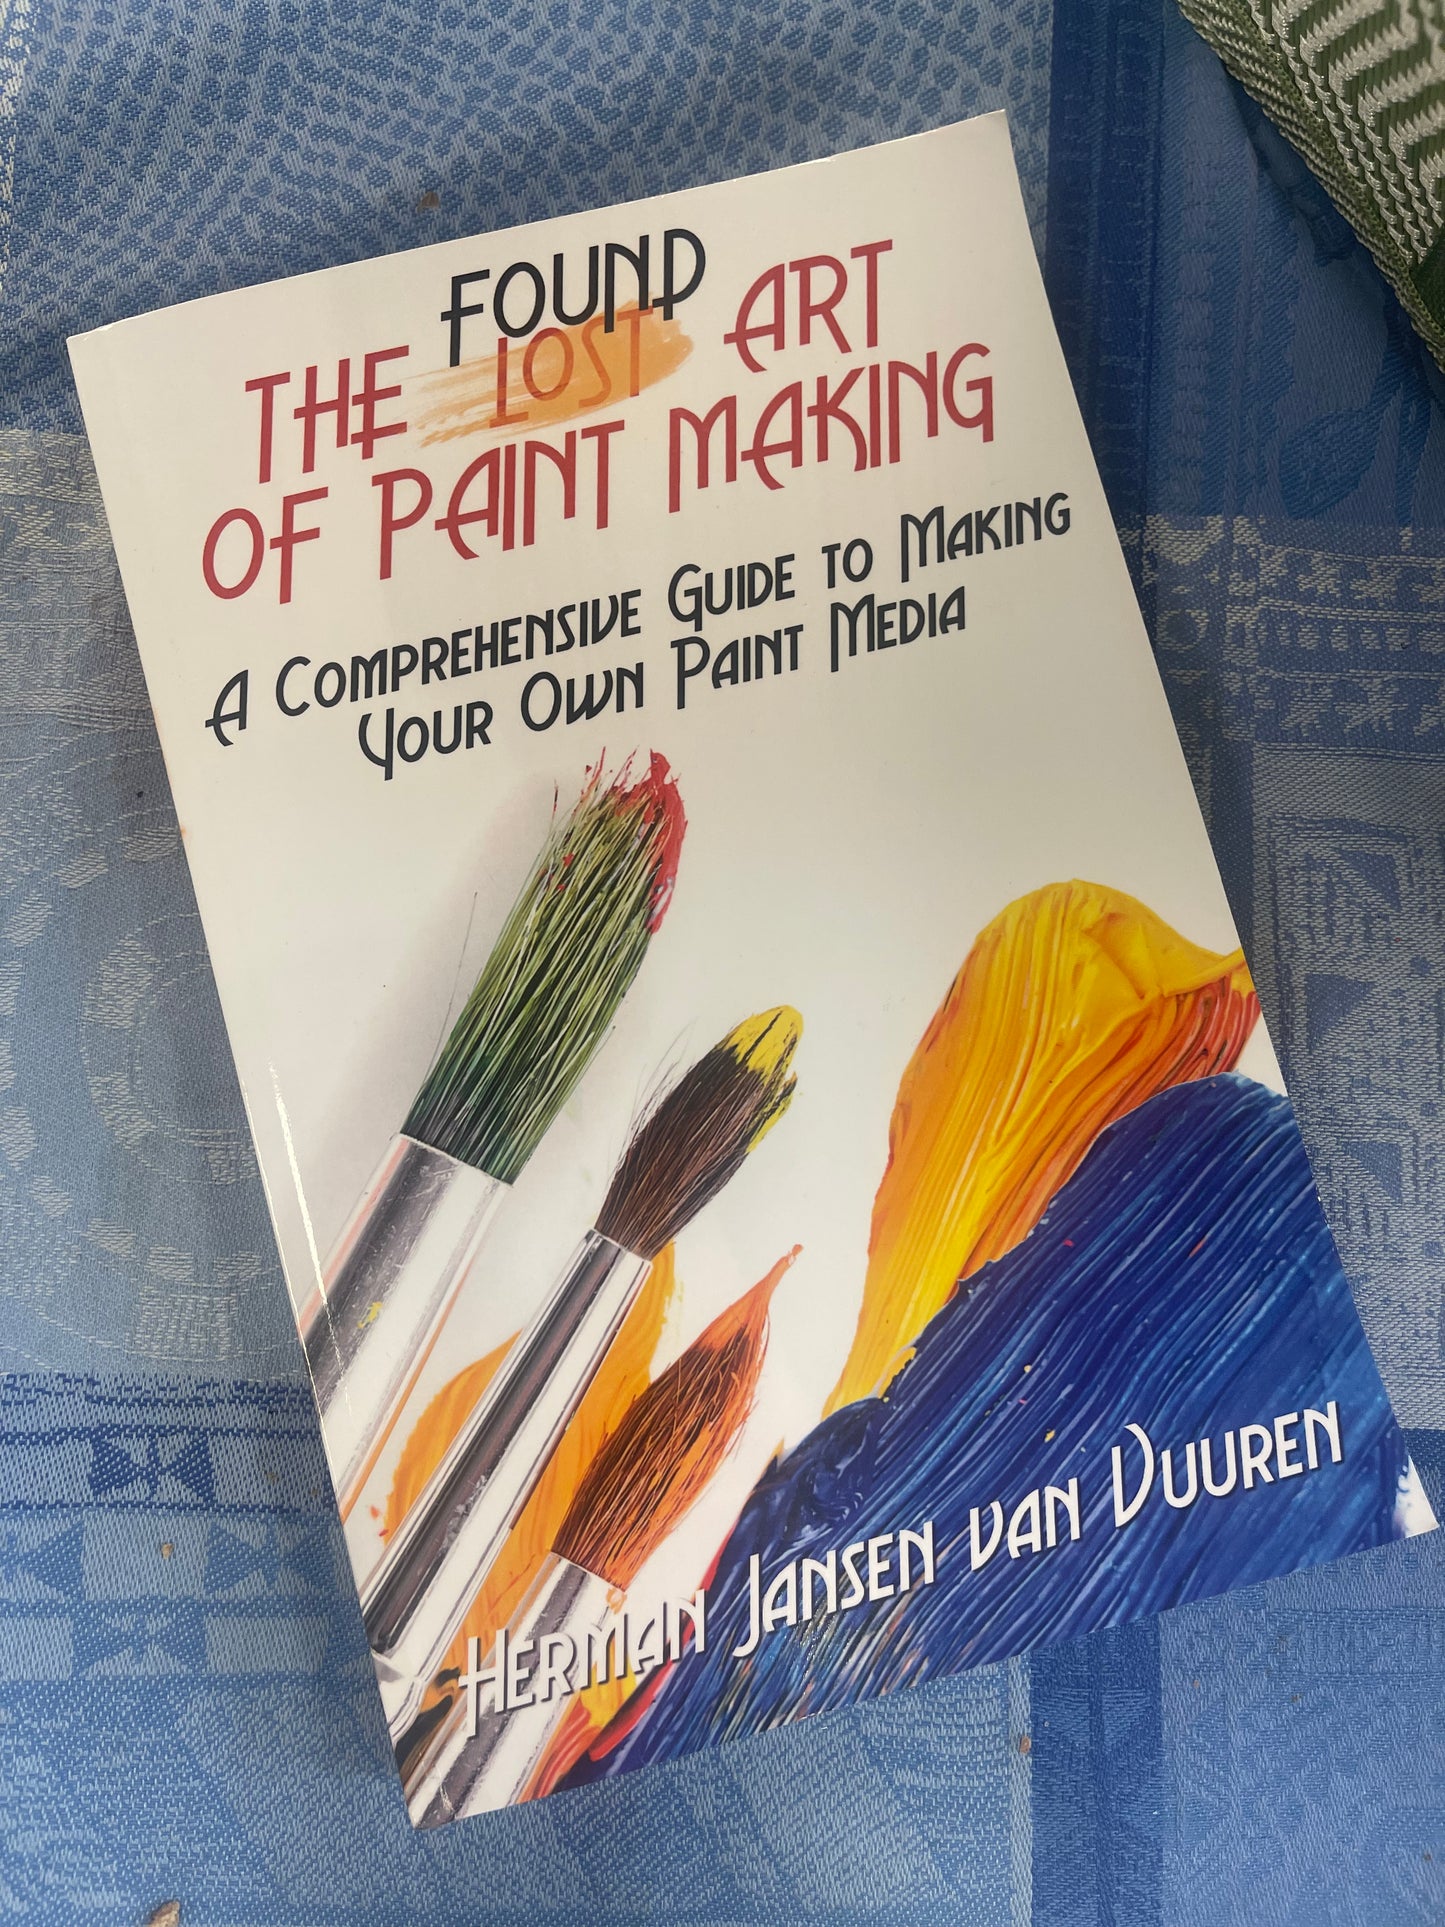 The Found Art of Paint Making